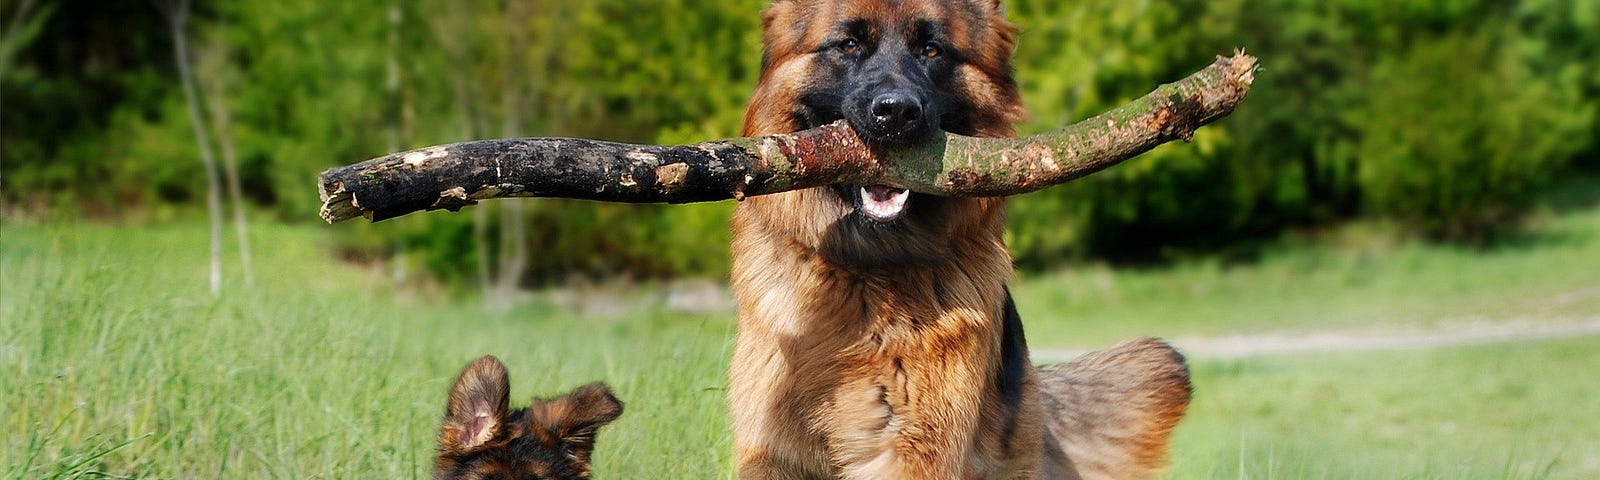 A German Shepherd dog running with a thick branch in its mouth while a German Shepherd puppy runs alongside